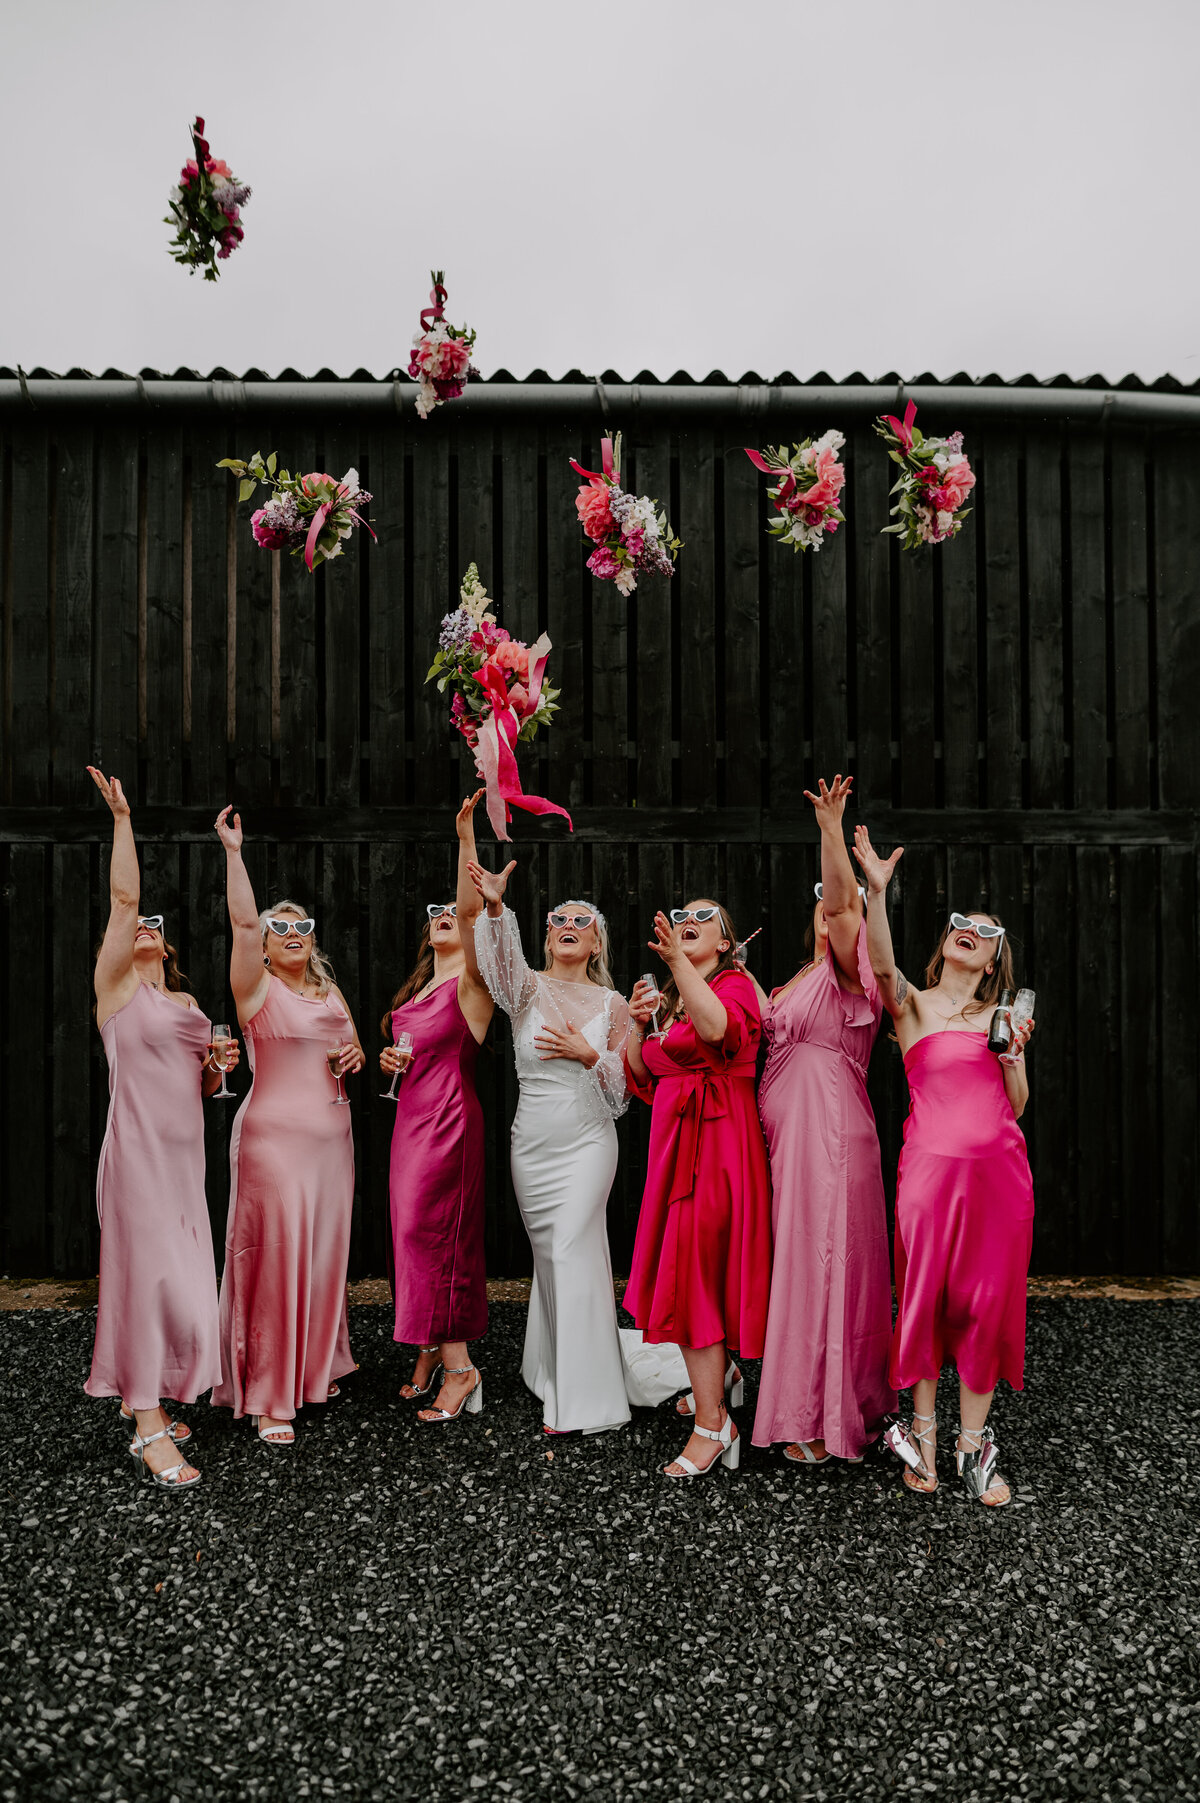 6 bridesmaids in pink bridesmaids dresses and a bride throw their pink bouquets in the air. They are all wearing white heart shaped sunglasses.